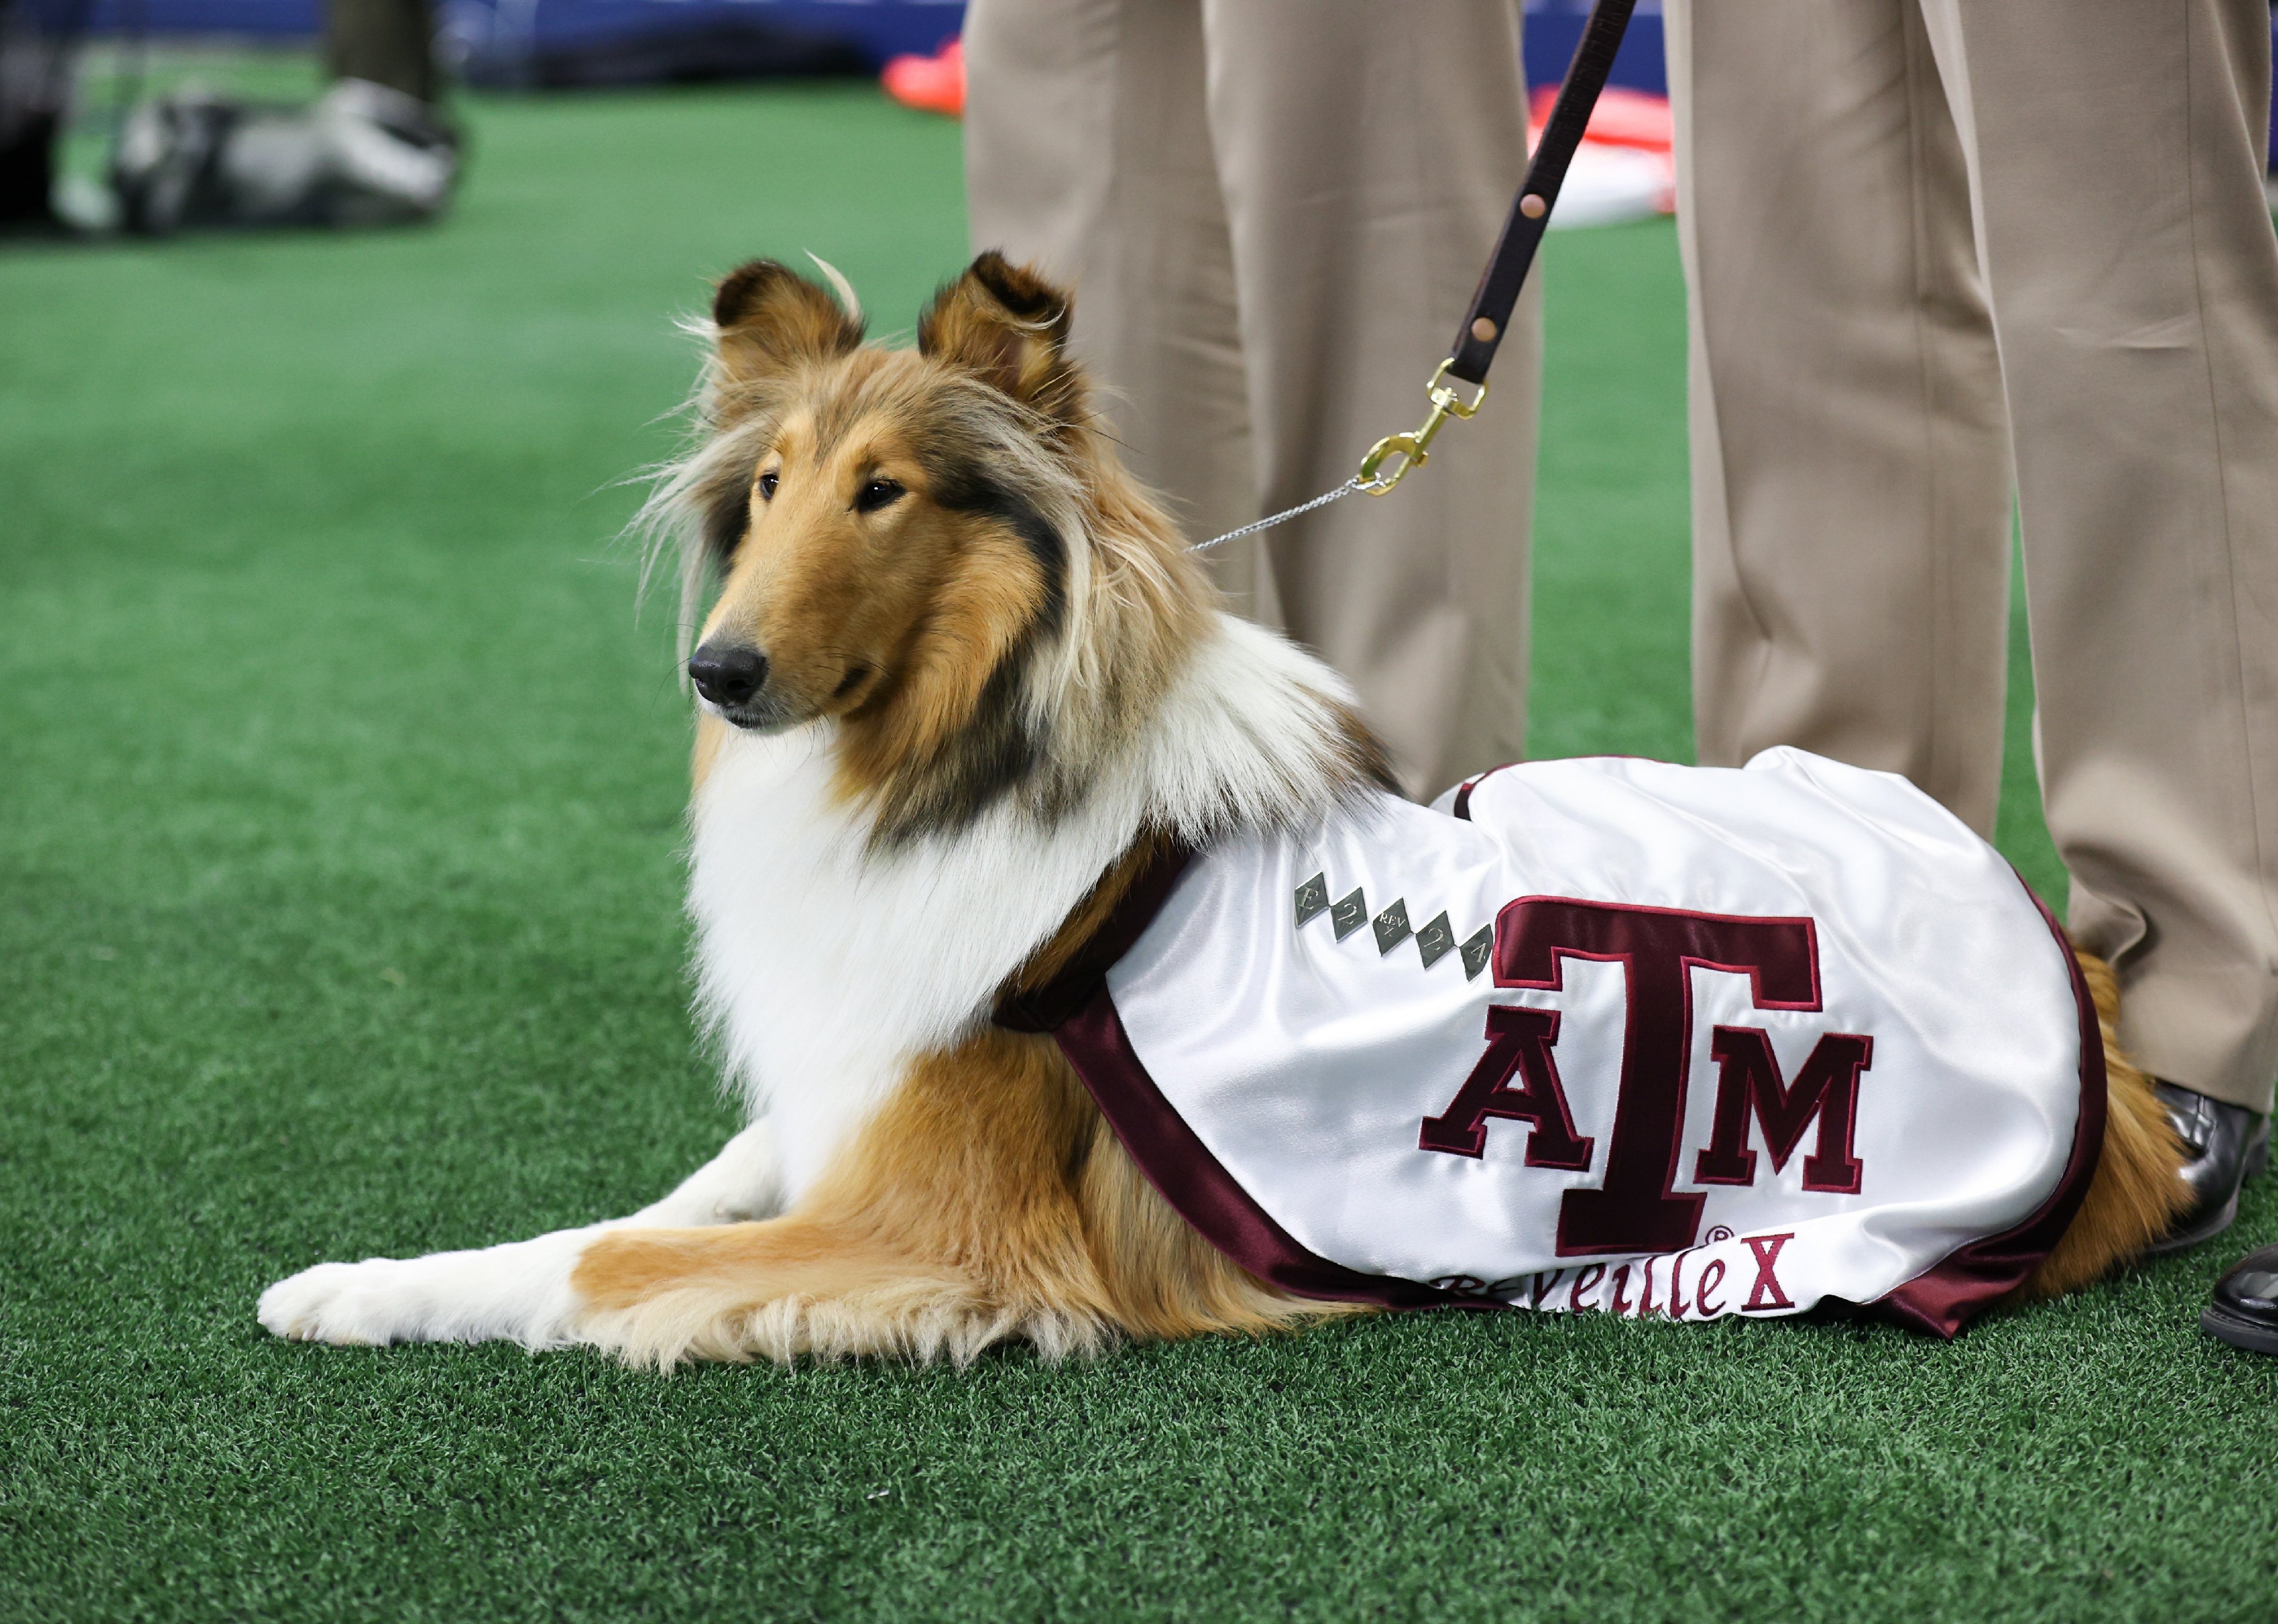 Texas A&M Aggies mascot Reveille looks on from the sideline.